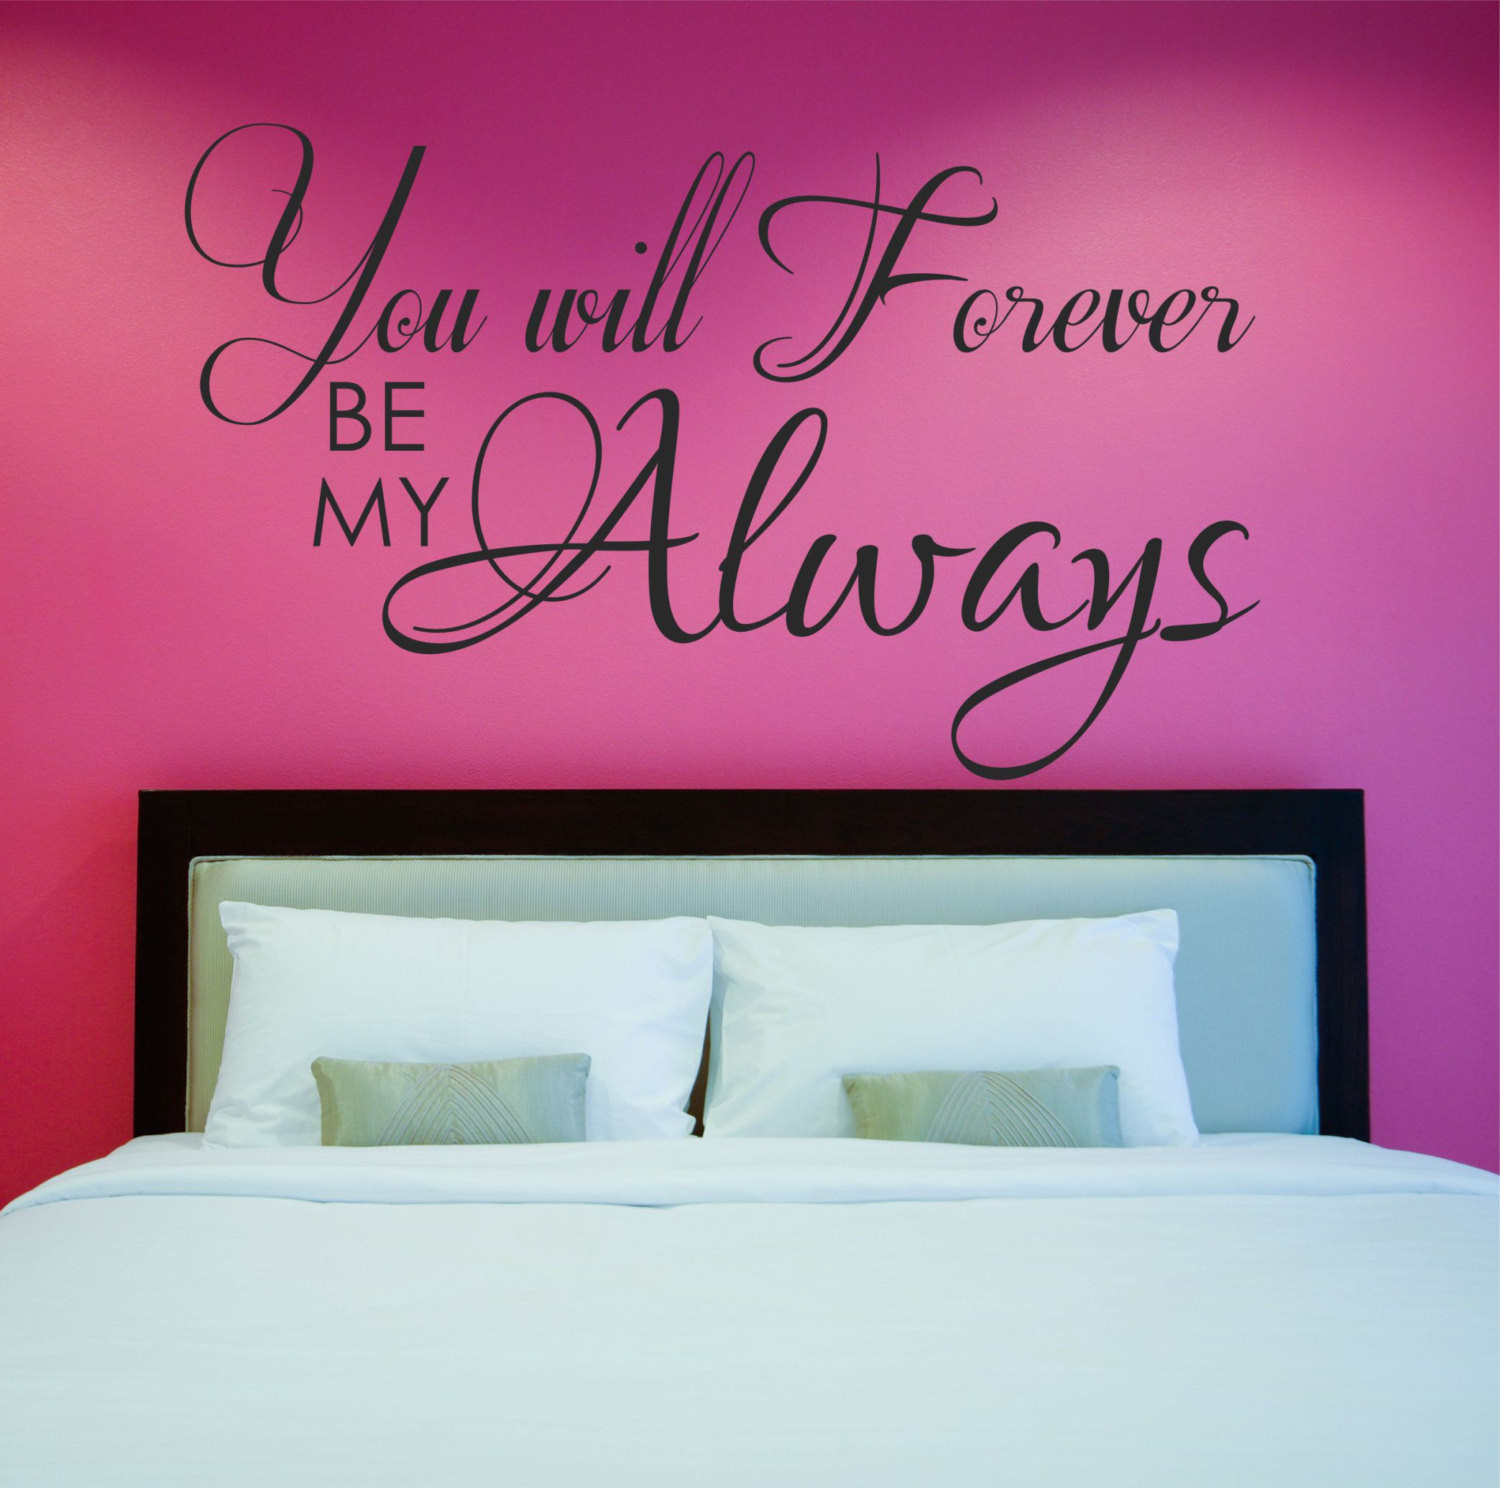 Bedroom Wall Decals Quotes
 Love Quote Decal Master Bedroom Wall Decal Vinyl Wall Quote